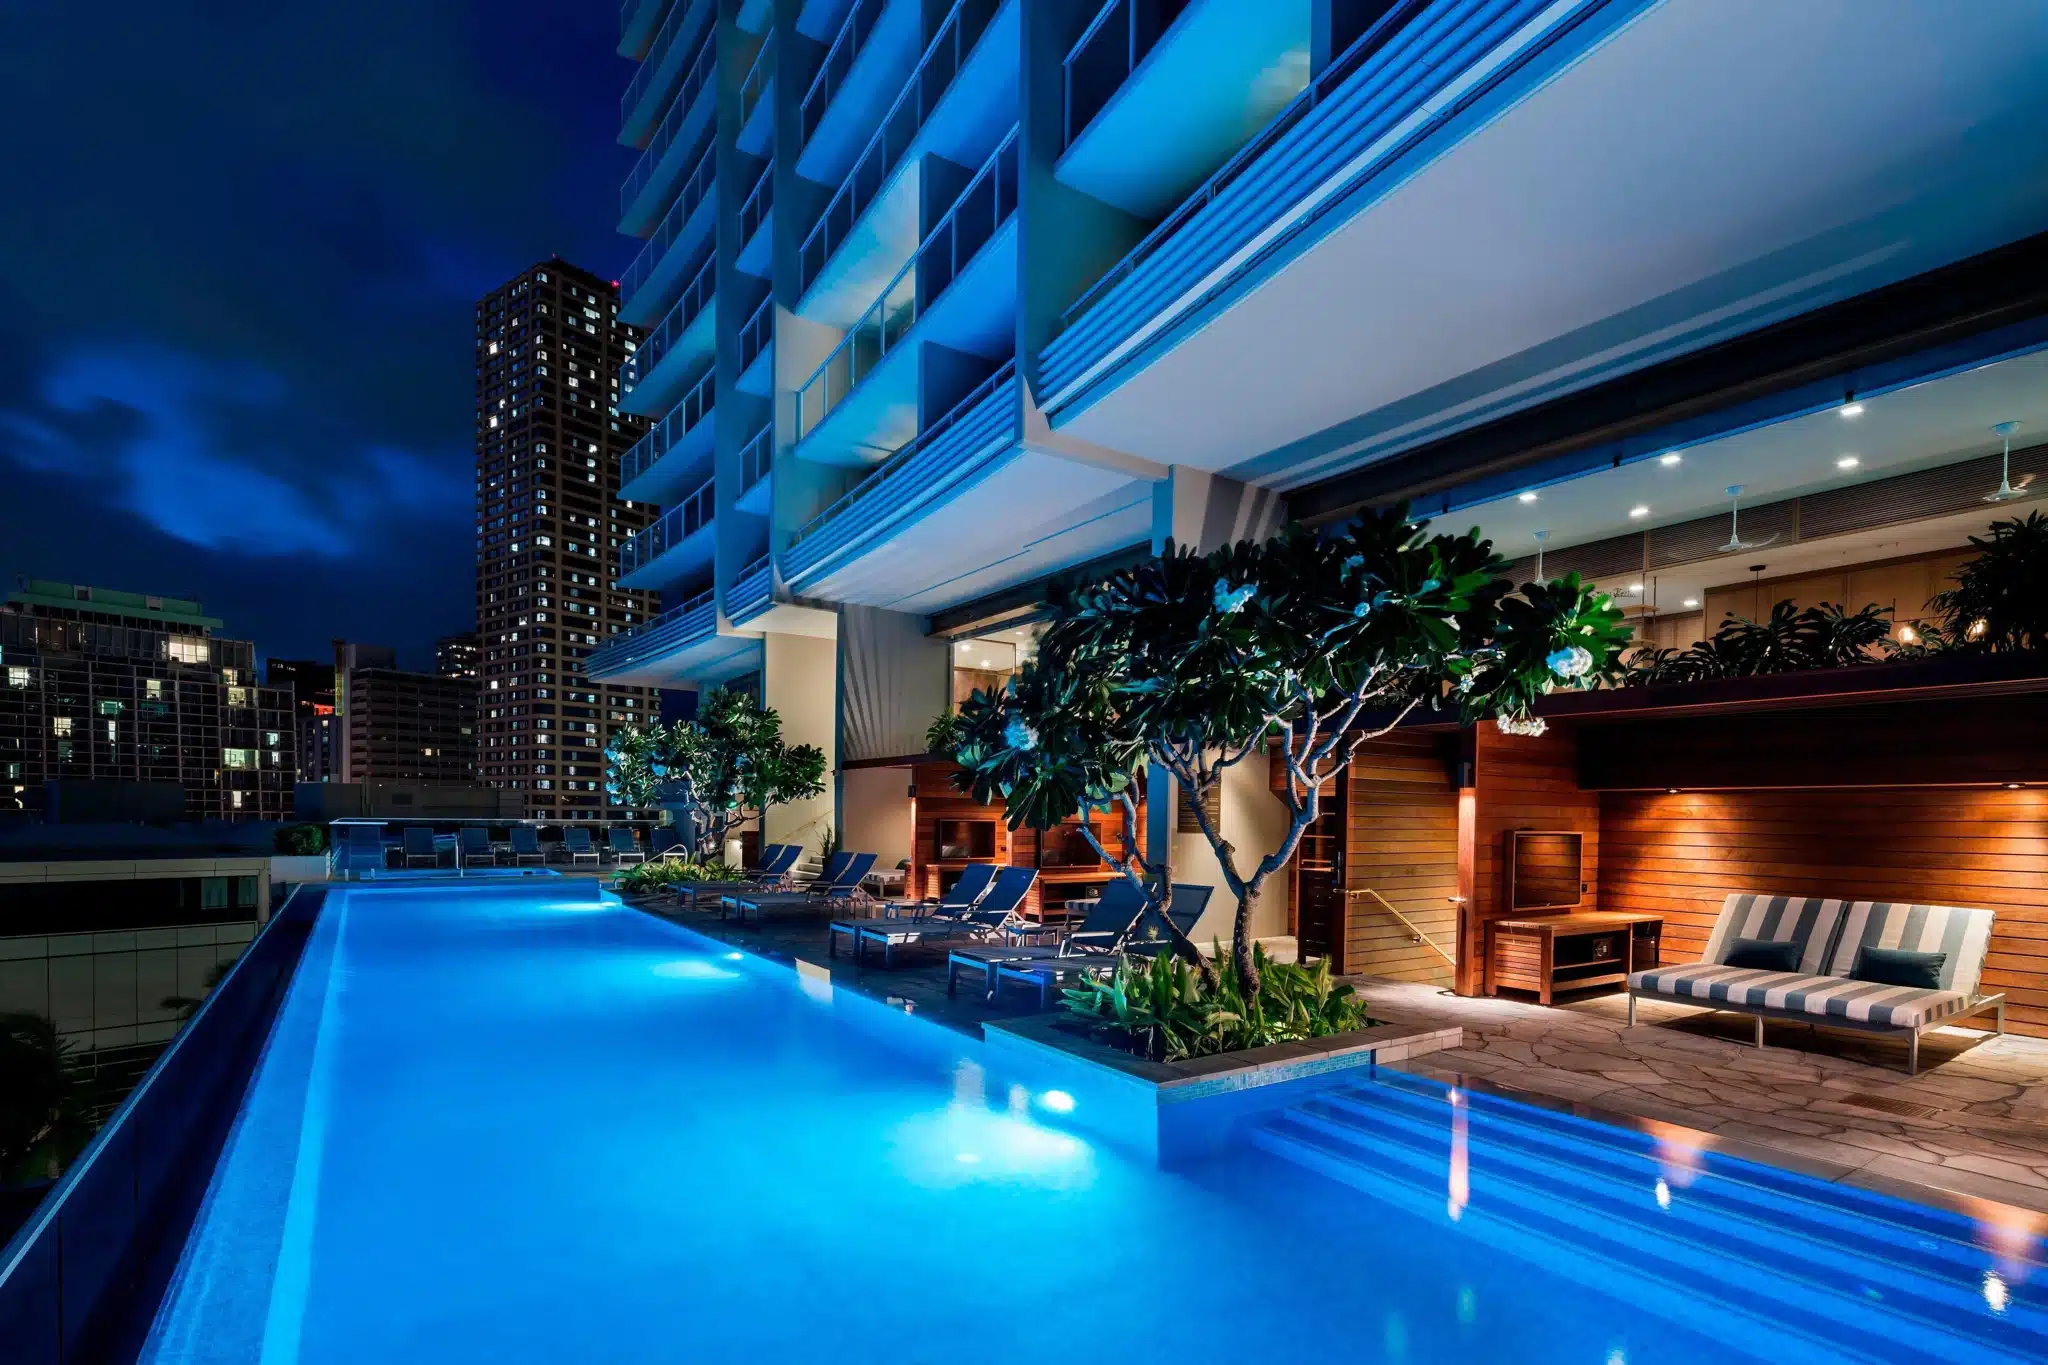 The Ritz Carlton Residences is a Hotel located in the city of Honolulu on Oahu, Hawaii